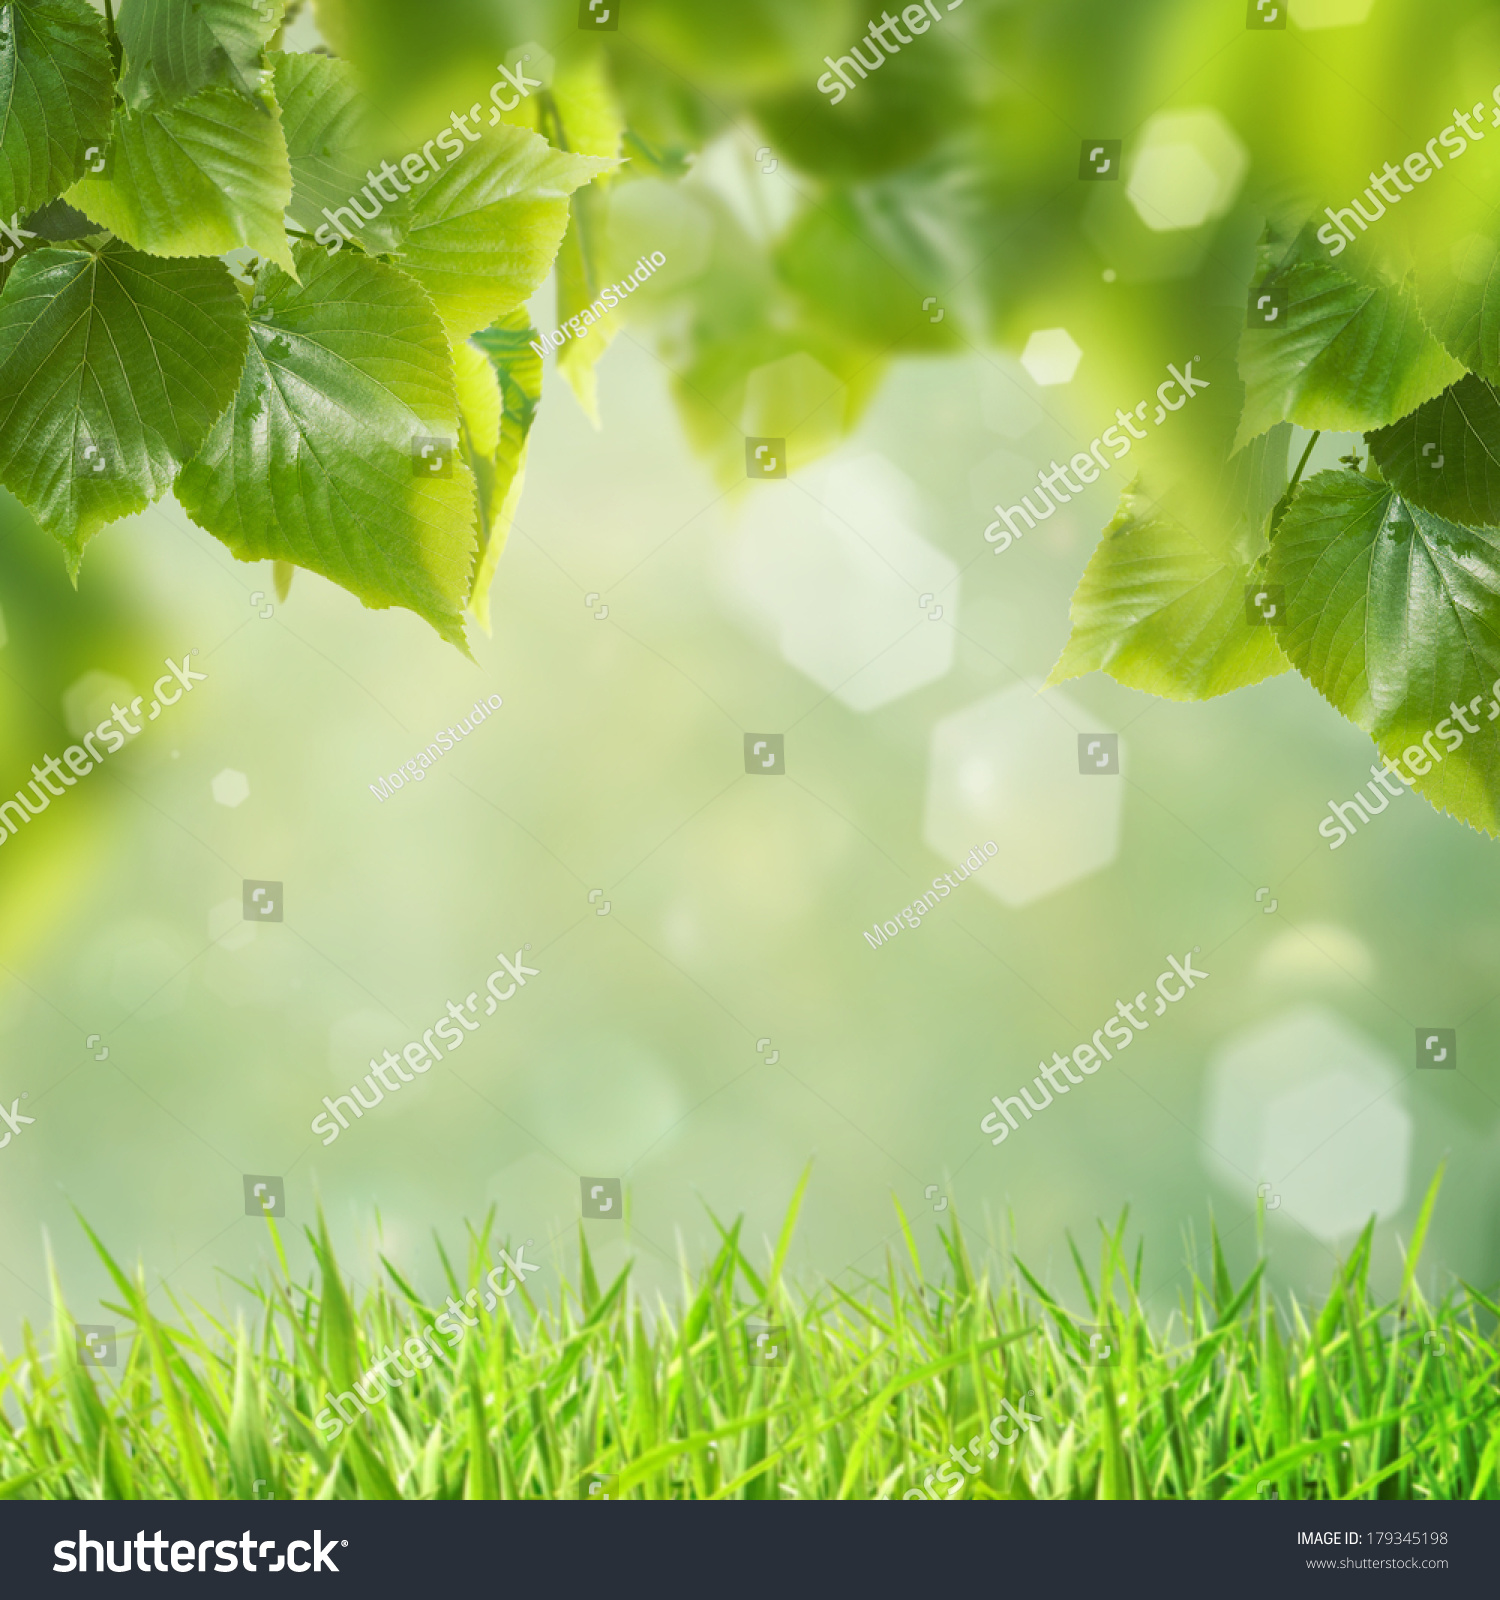 Spring Leaves Stock Photo (Royalty Free) 179345198 - Shutterstock